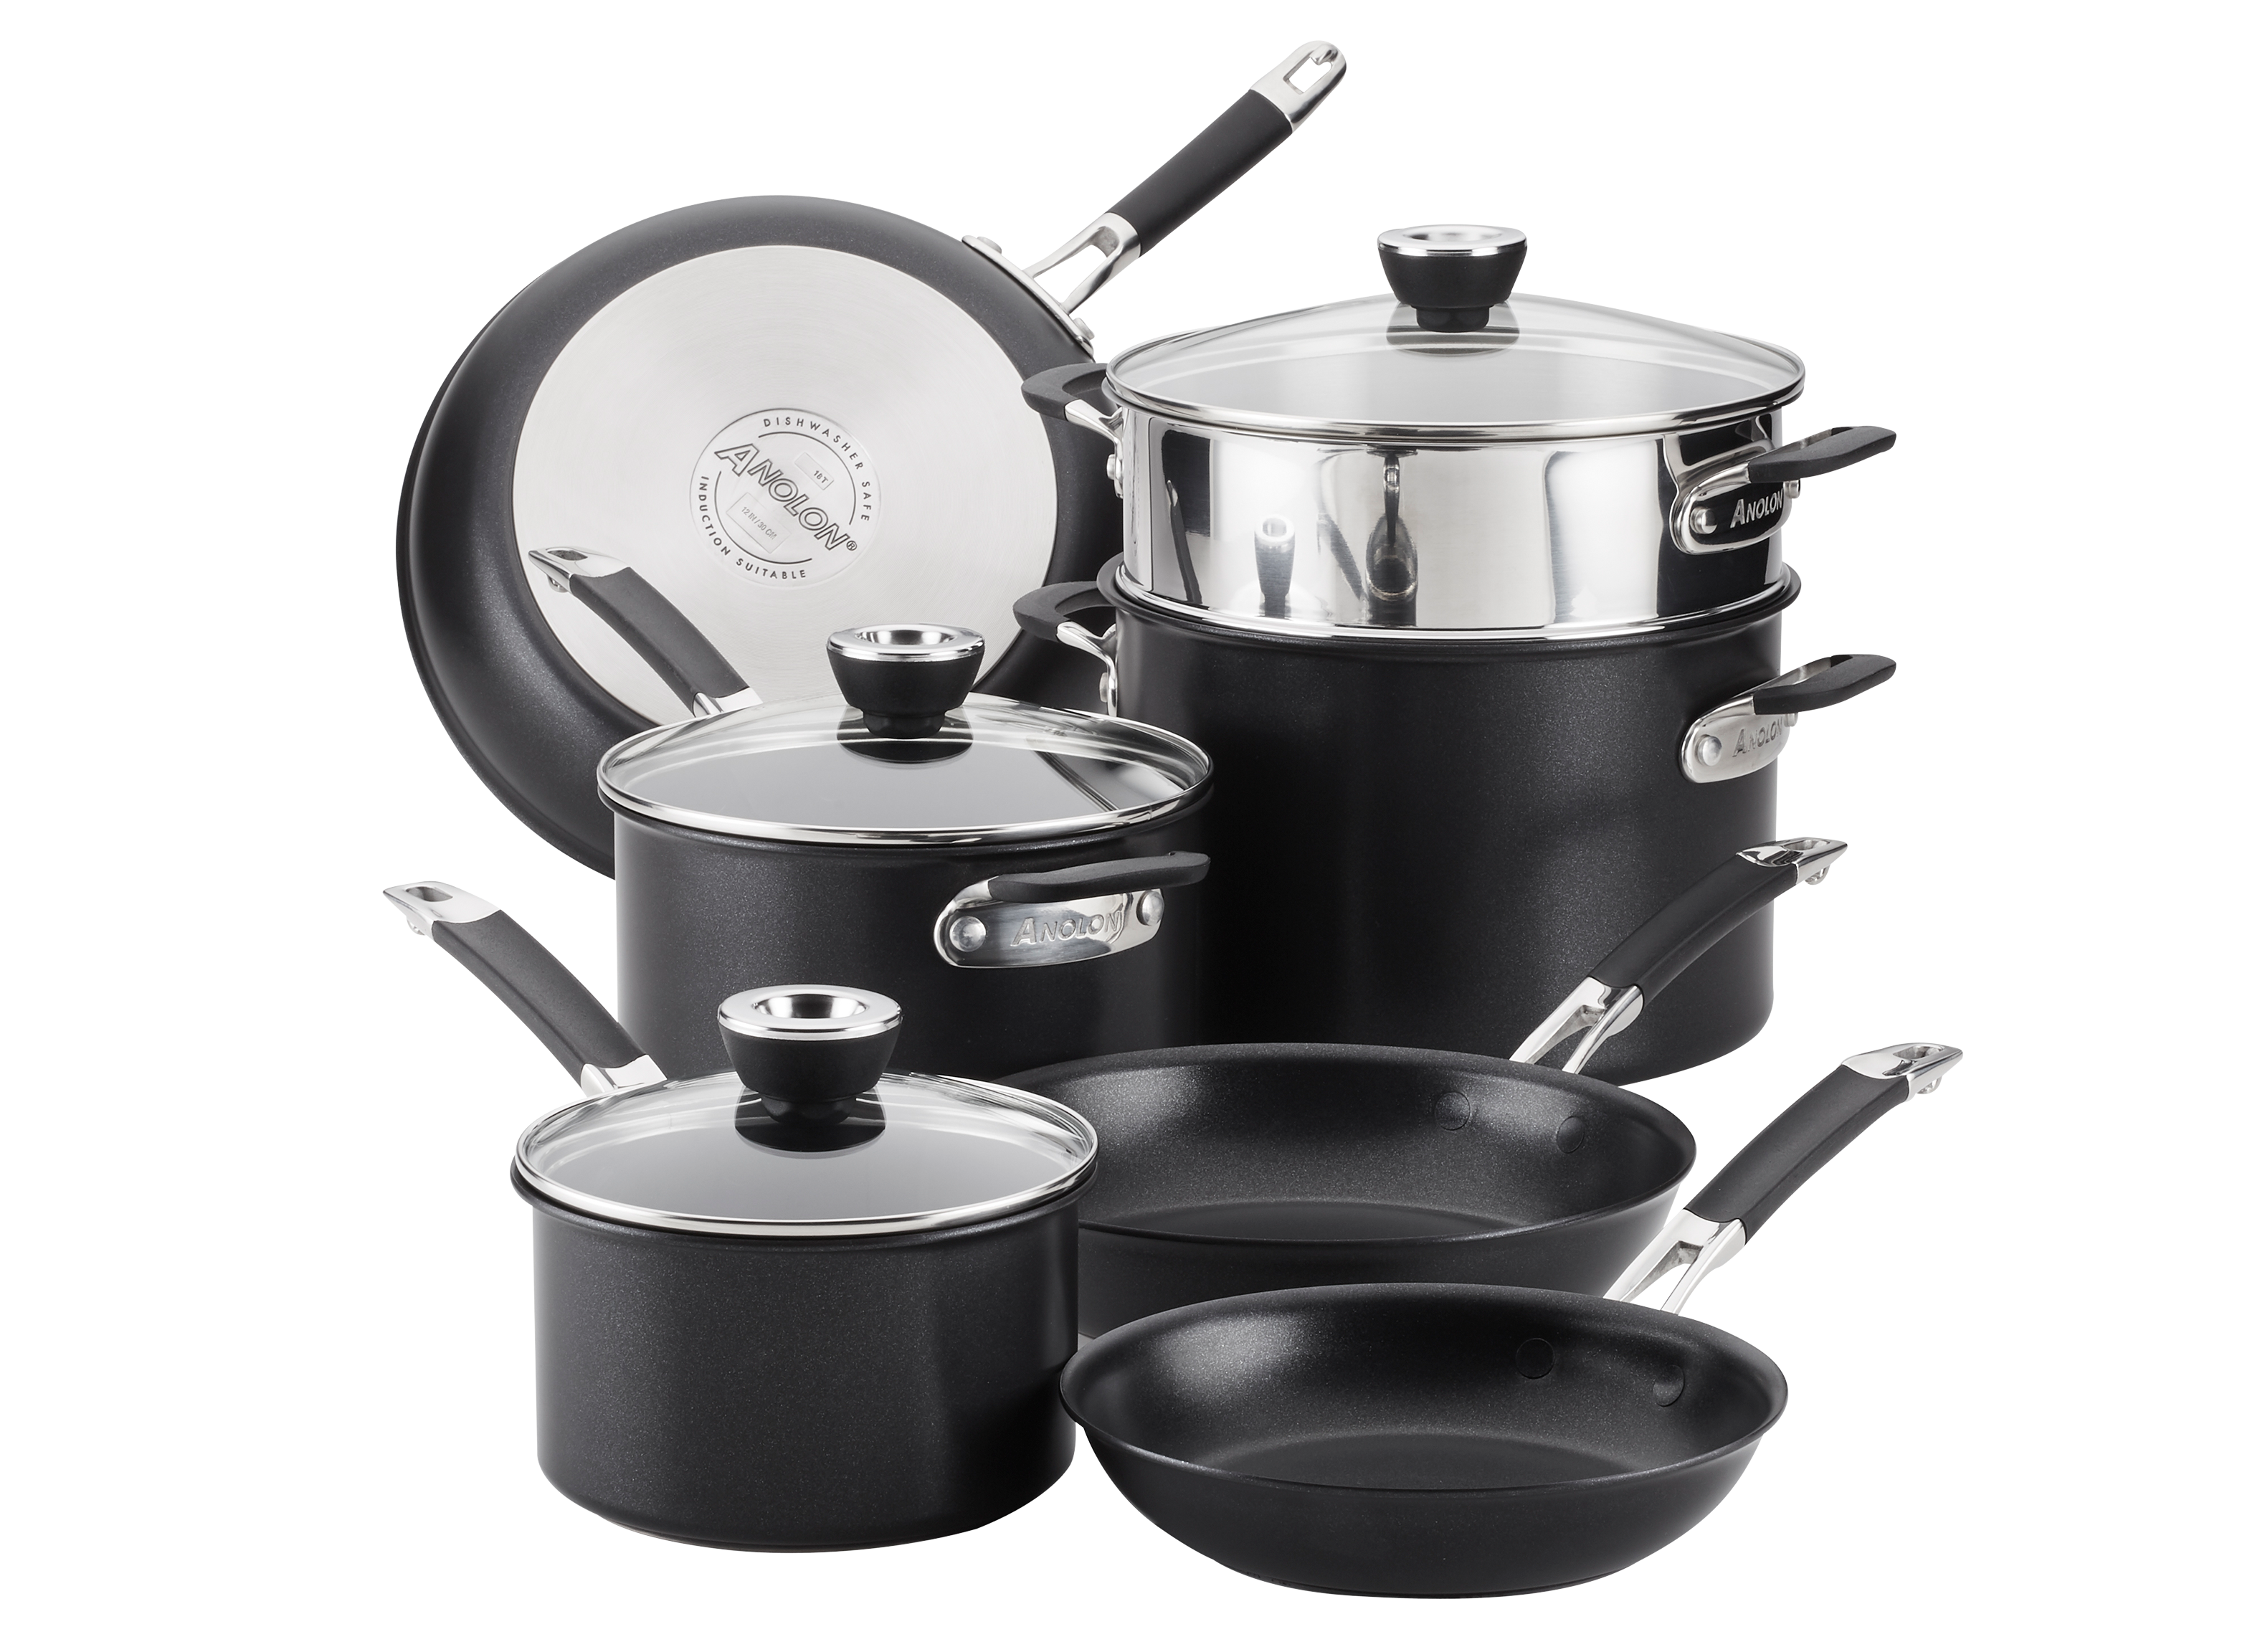 https://crdms.images.consumerreports.org/prod/products/cr/models/399703-cookware-sets-nonstick-anolon-smartstack-10008344.png